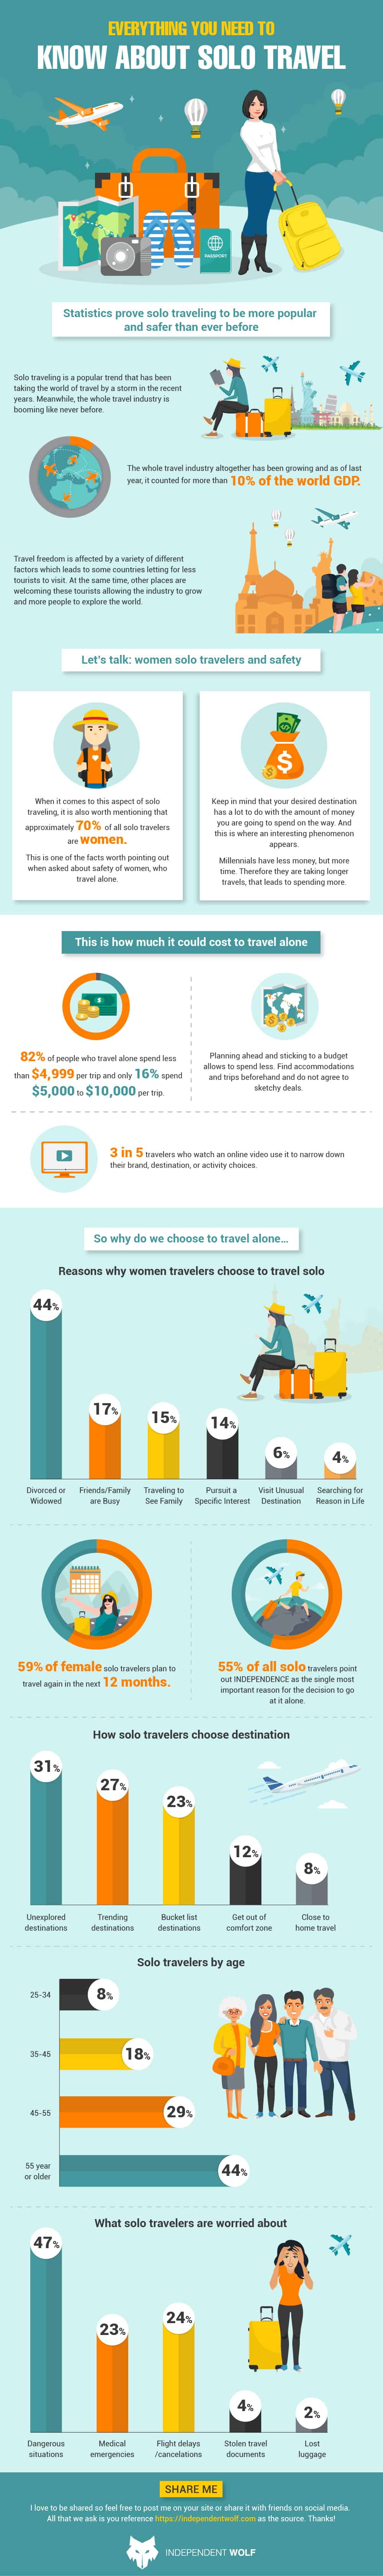 The Ultimate Guide To Solo Travel | Daily Infographic